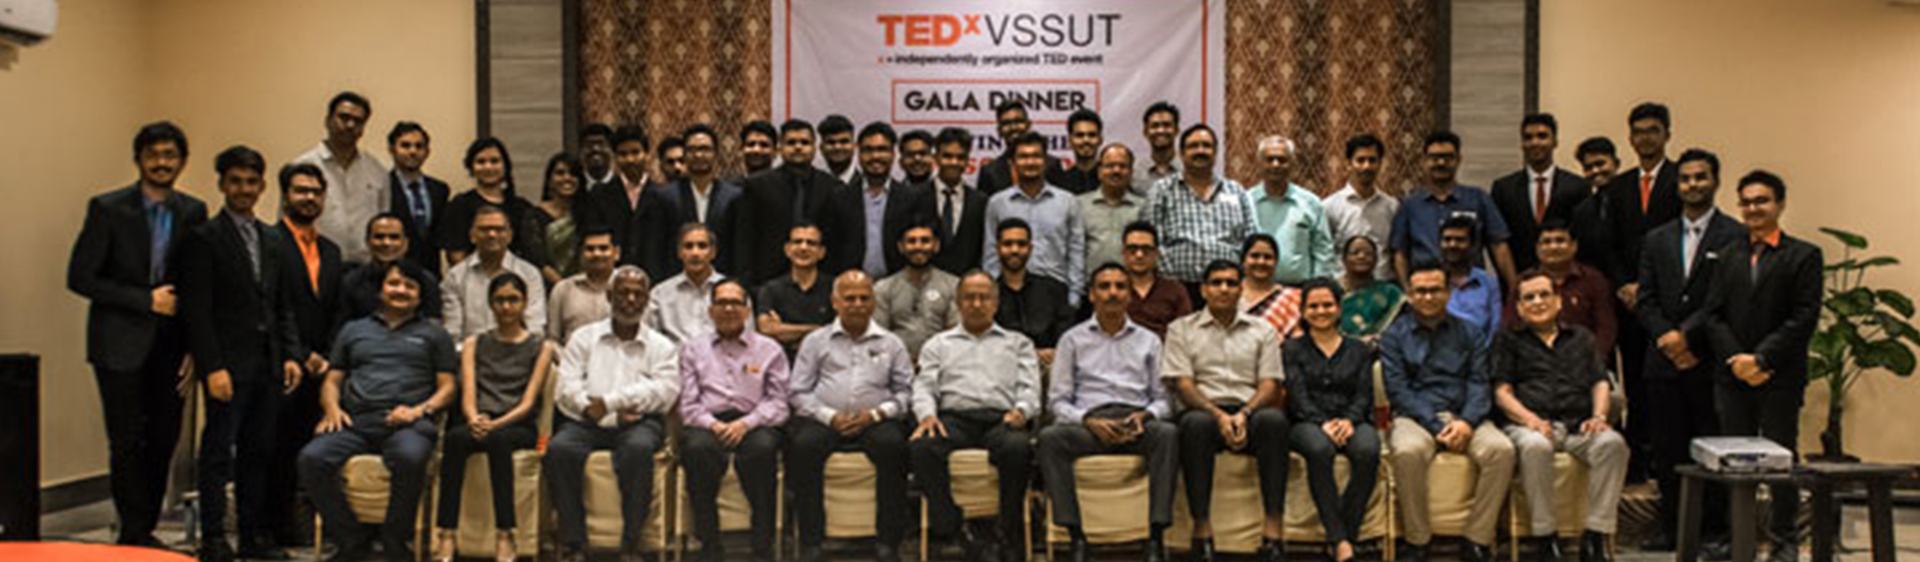 Organization of TED Conference - TEDxVSSUT on 30th September 2018